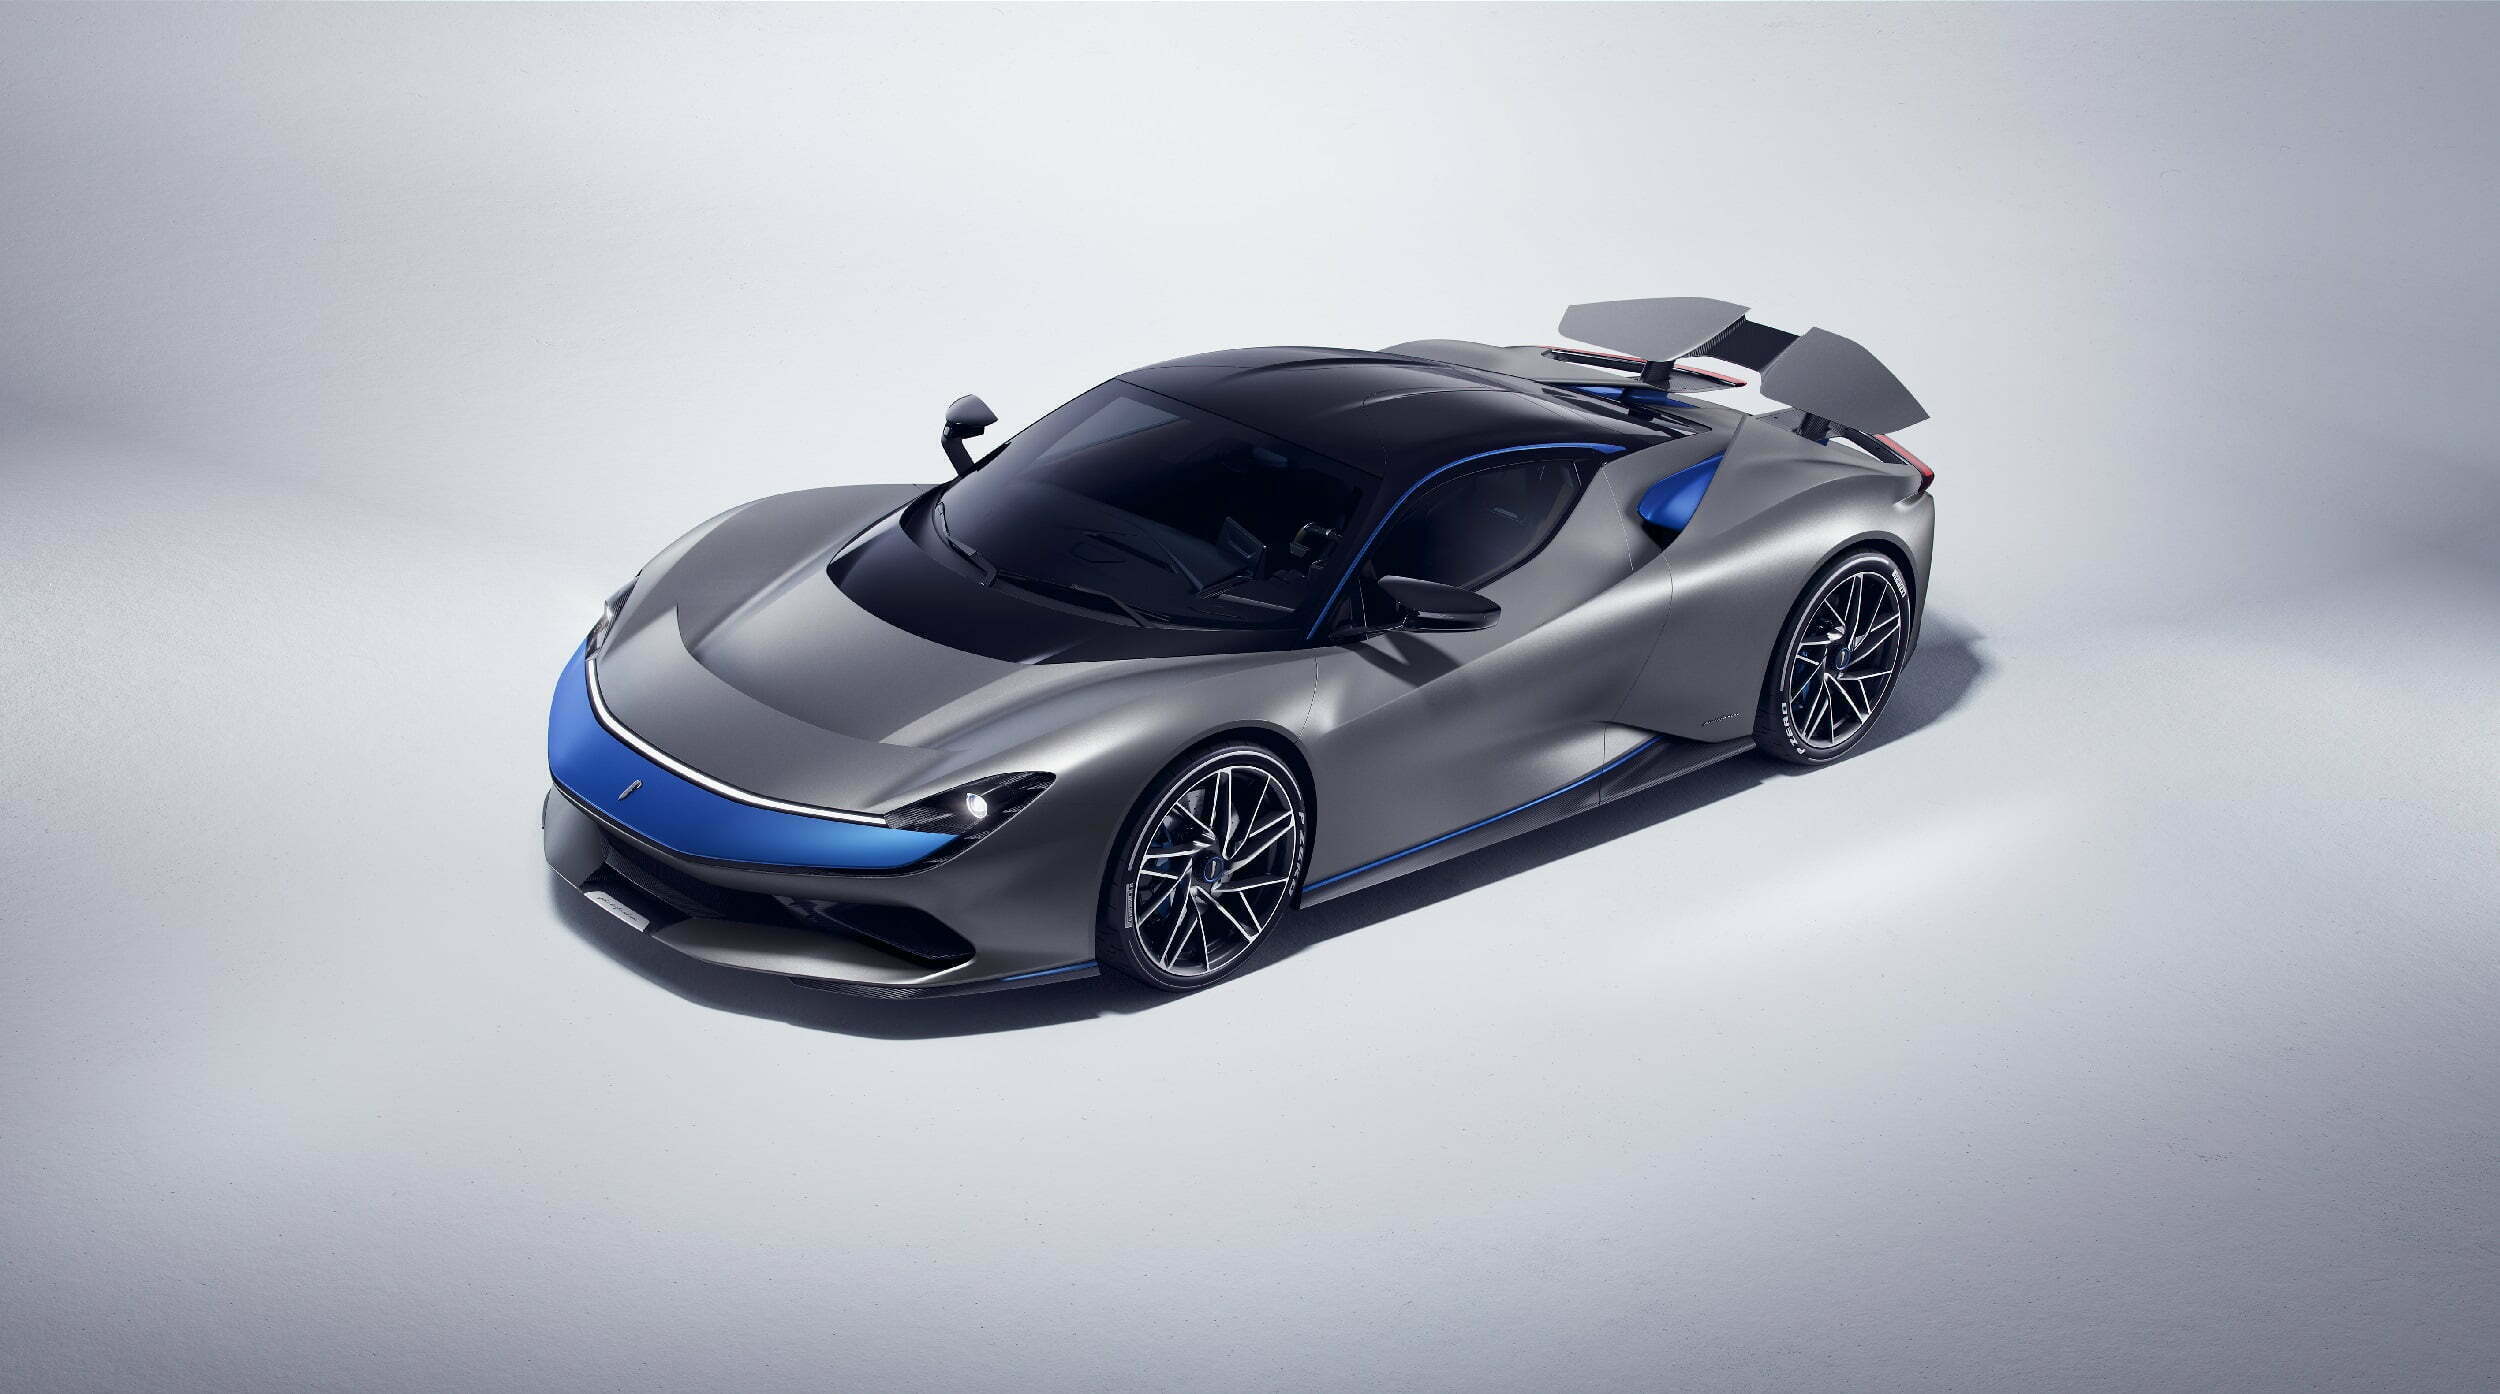 Electric Hypercar: Pininfarina Battista Is Wallpaper Material And Gets  Juice From A Wall Socket